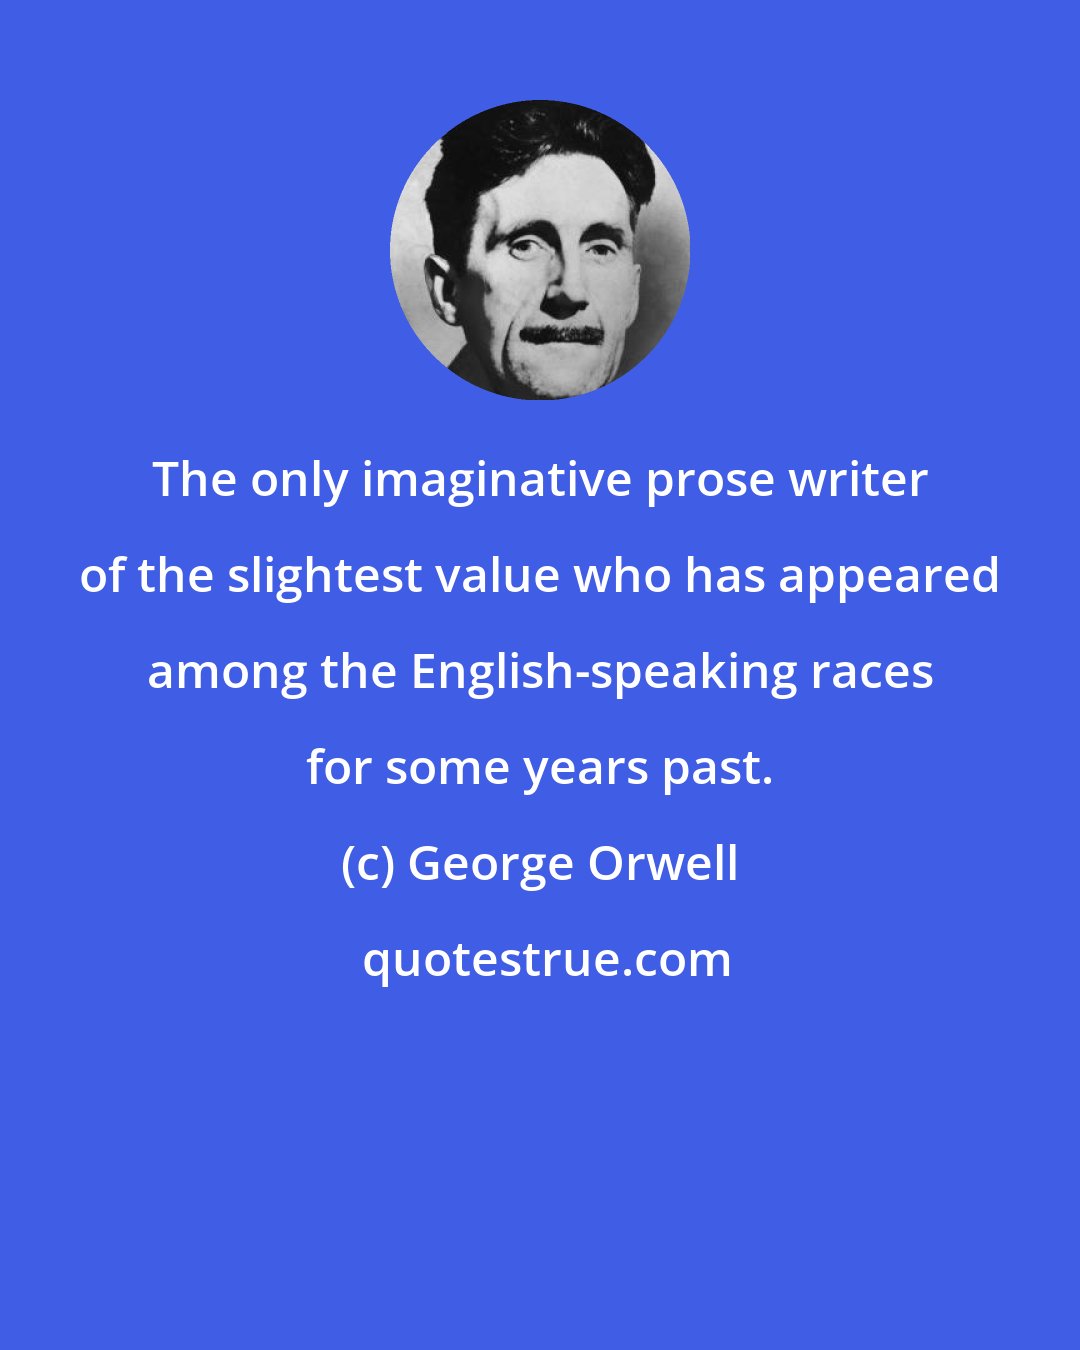 George Orwell: The only imaginative prose writer of the slightest value who has appeared among the English-speaking races for some years past.